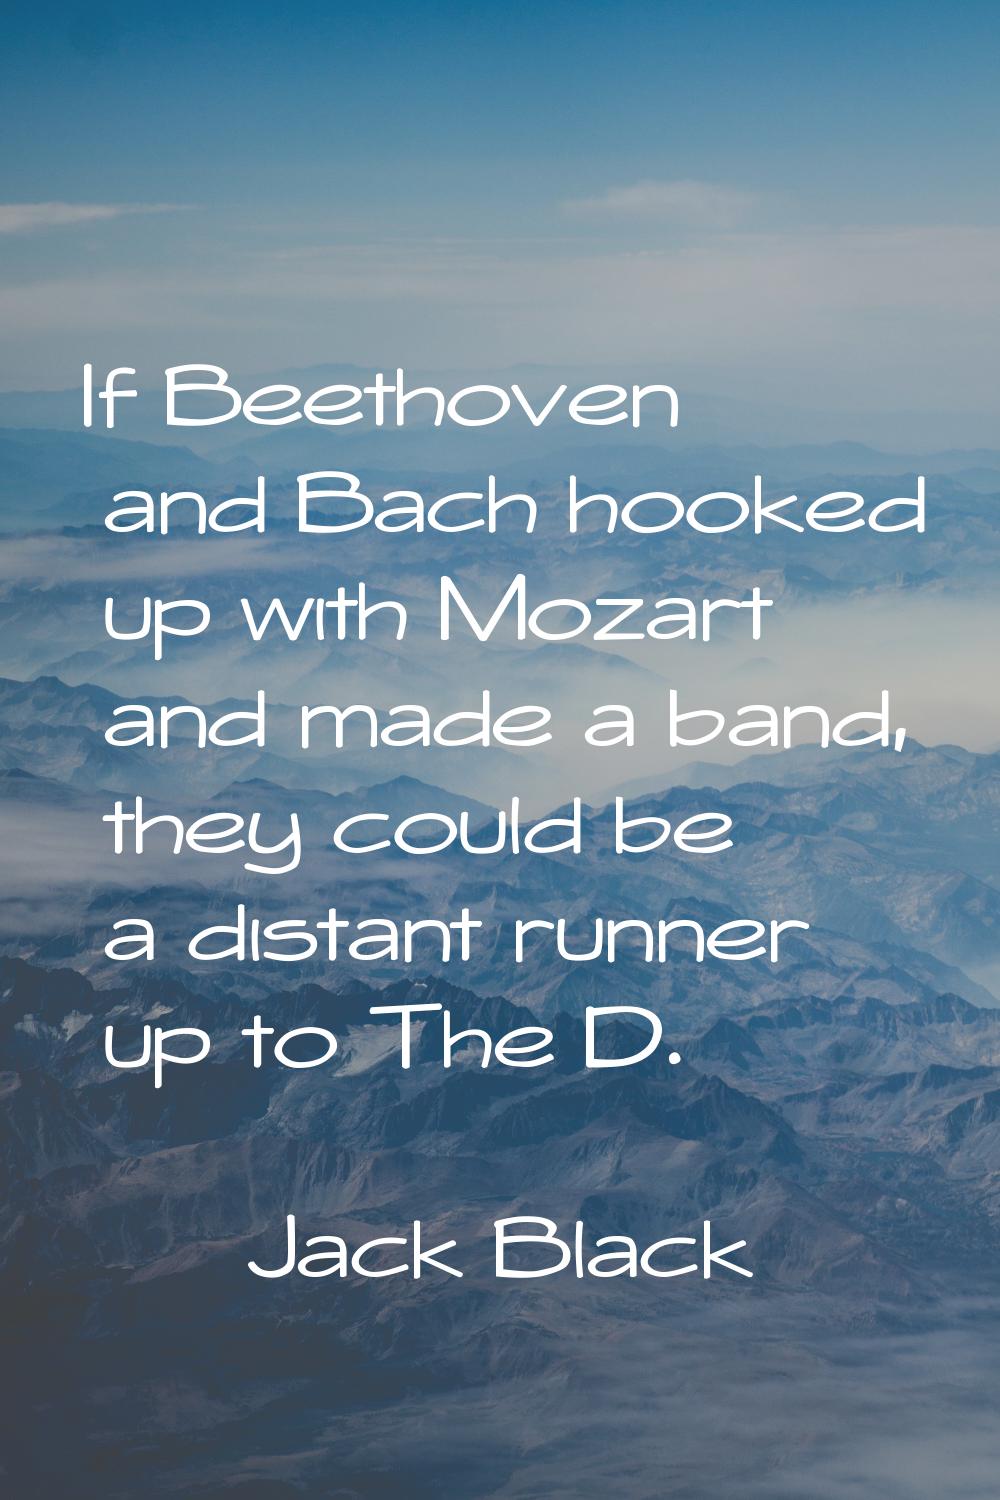 If Beethoven and Bach hooked up with Mozart and made a band, they could be a distant runner up to T